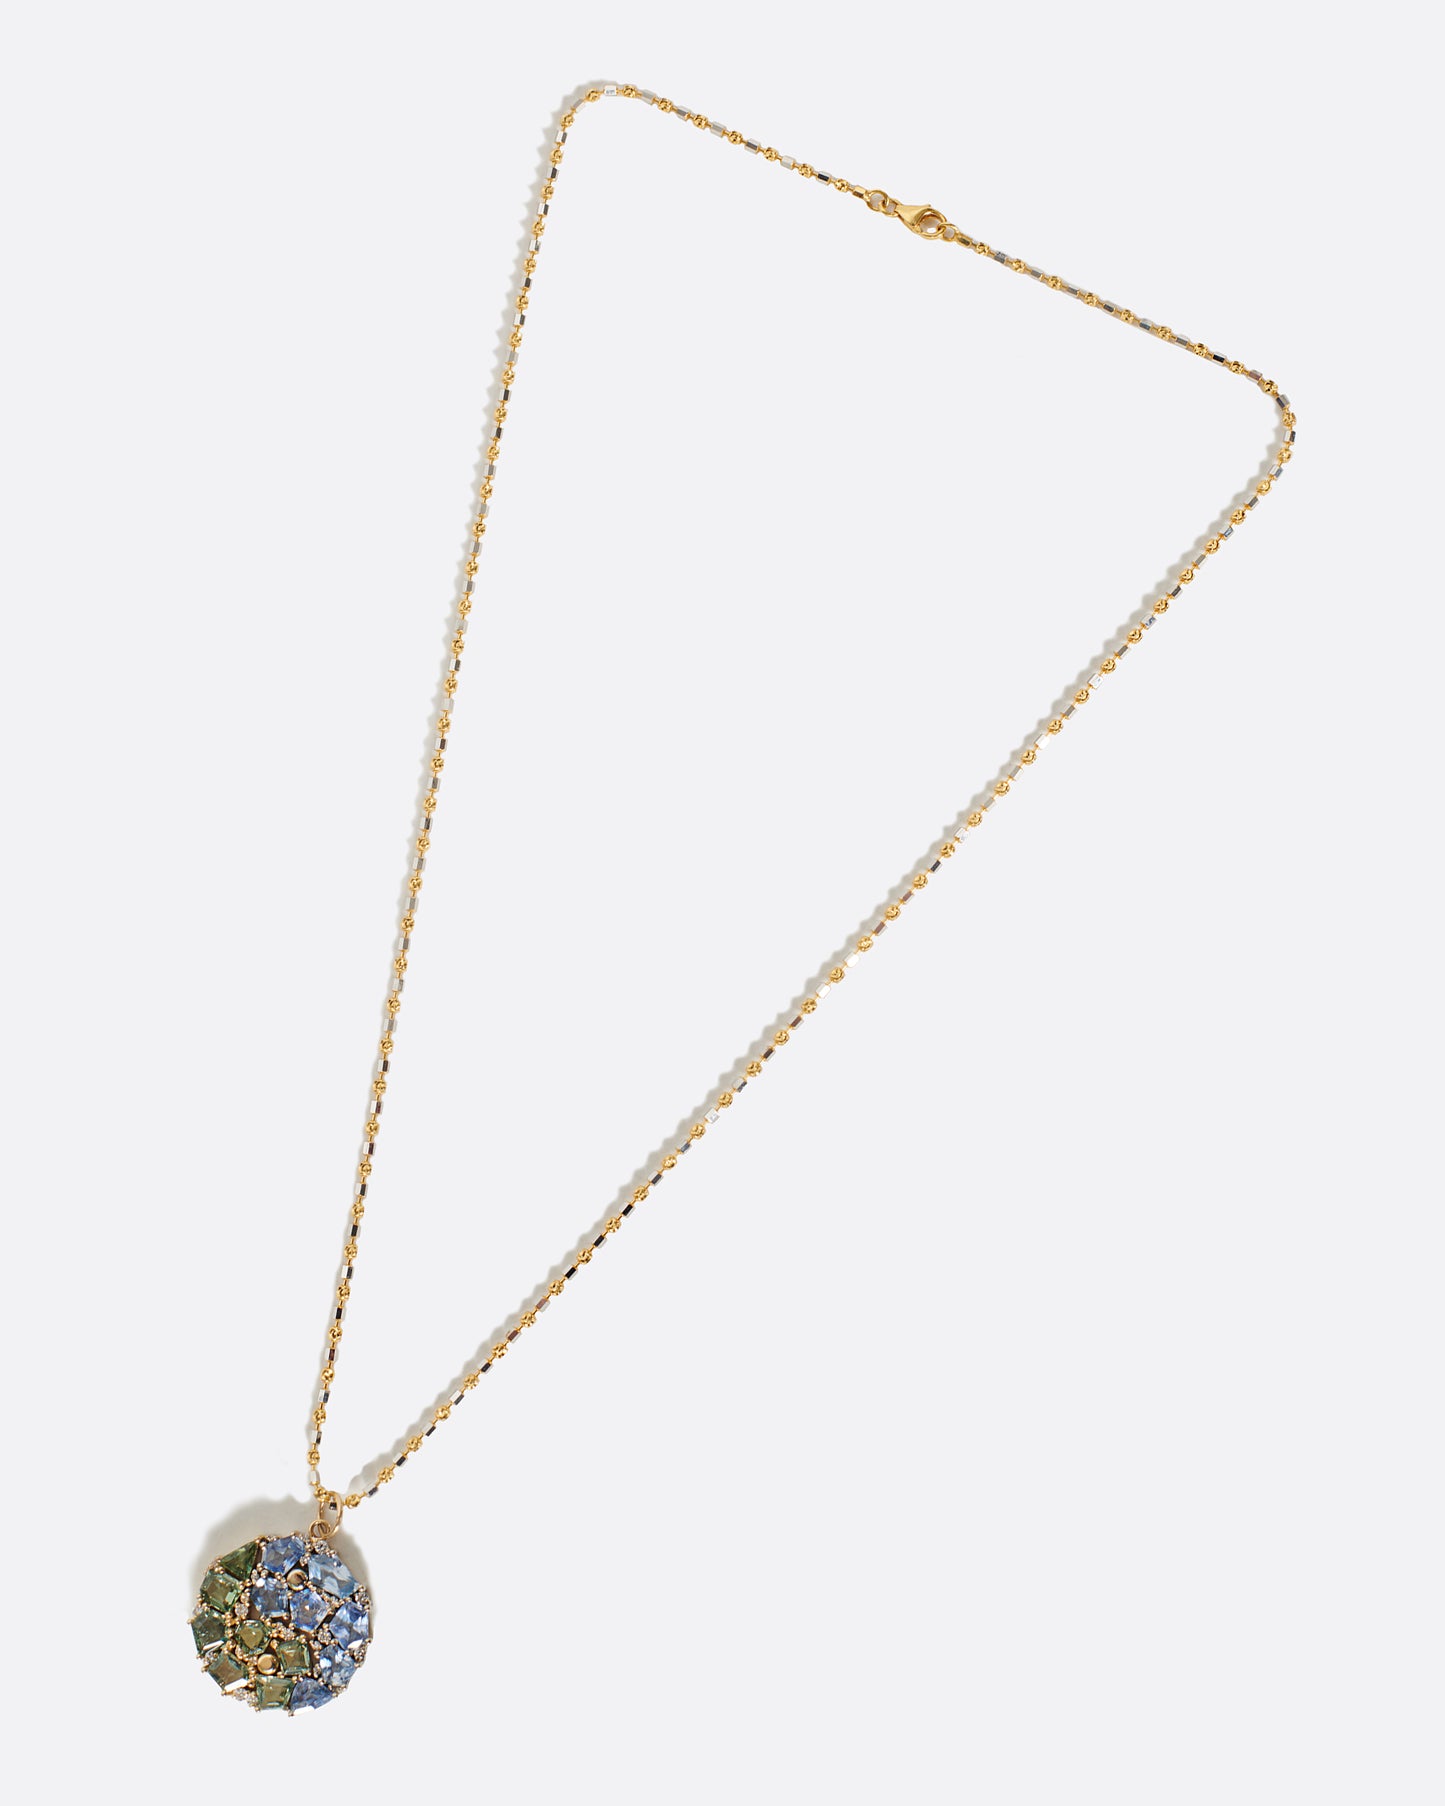 A two-tone yellow and white gold chain with a mosaic blue and green sapphire yin yang pendant.